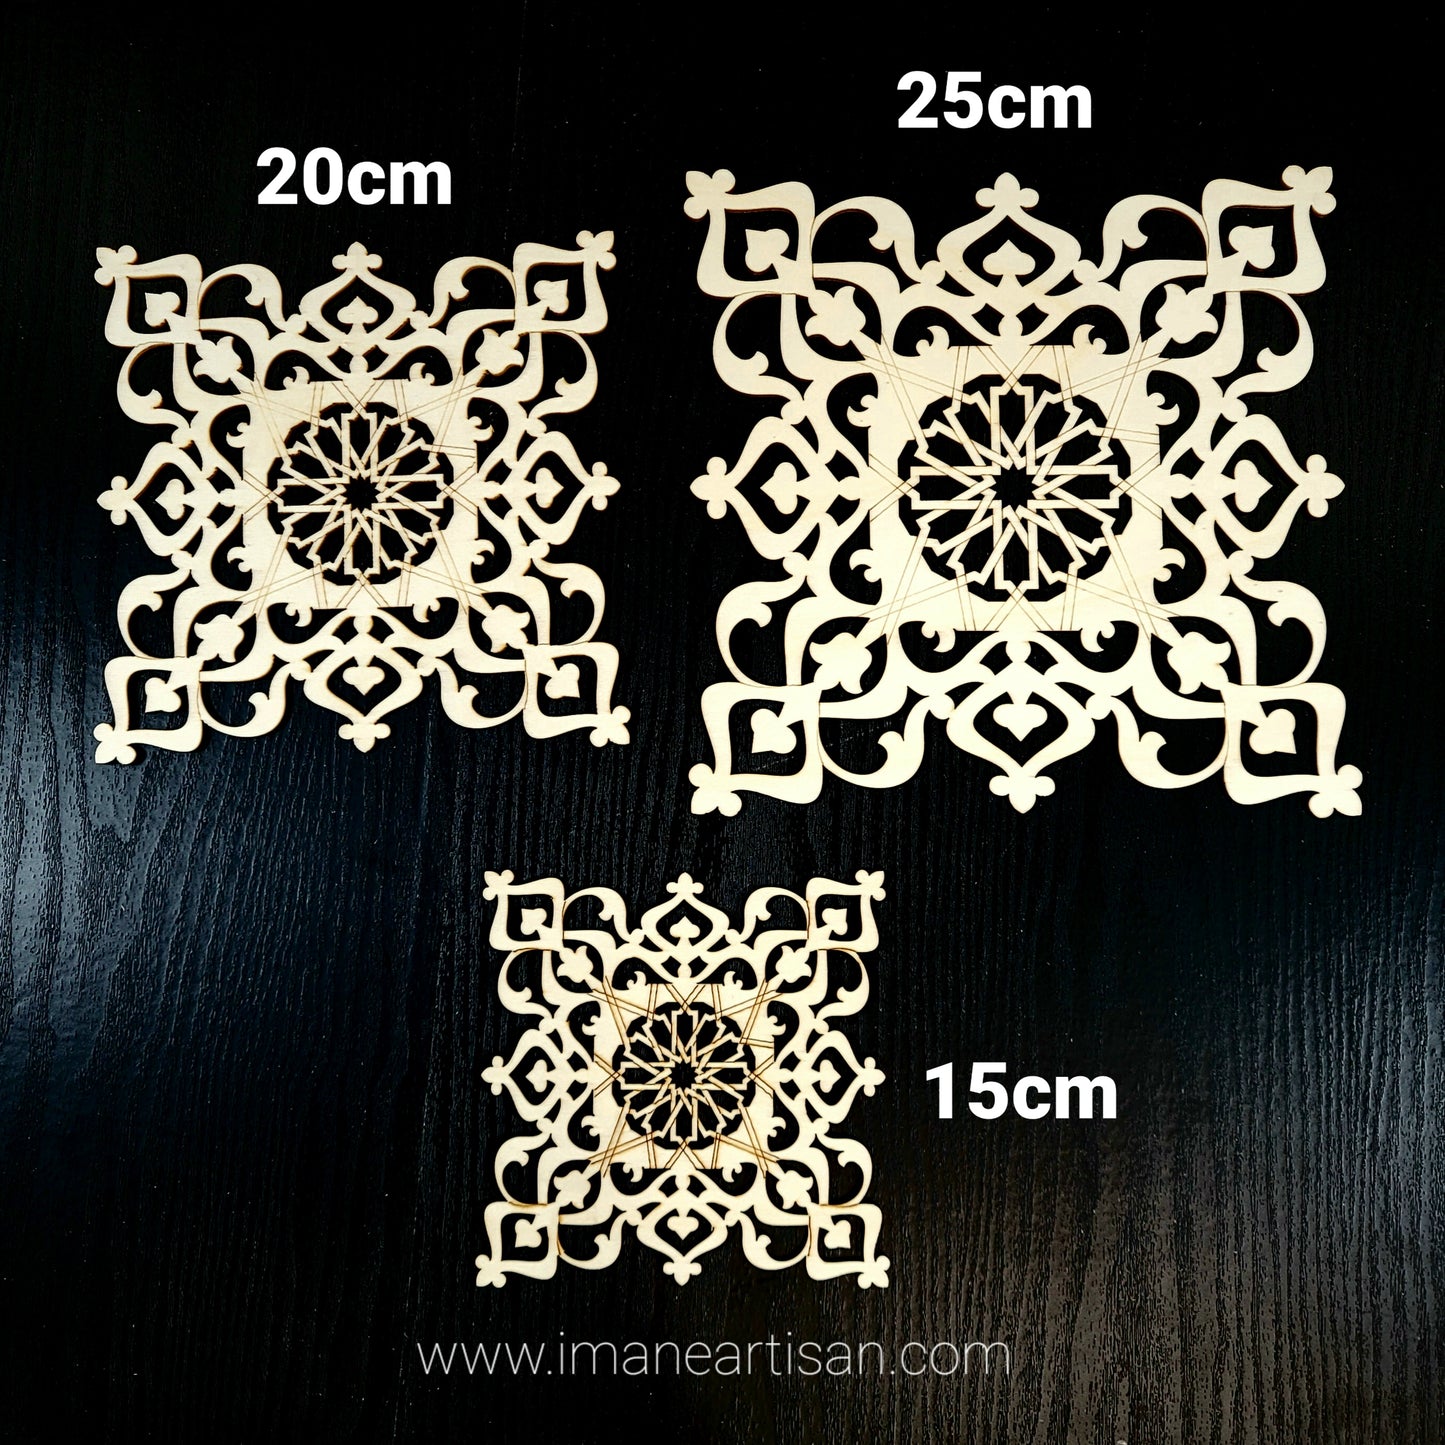 S-005/ Moroccan Arabesque Square / Carved Wood / Laser Cut Wood / geometric Design/ Table decor / wall decor / ceiling decor / Zowaqa